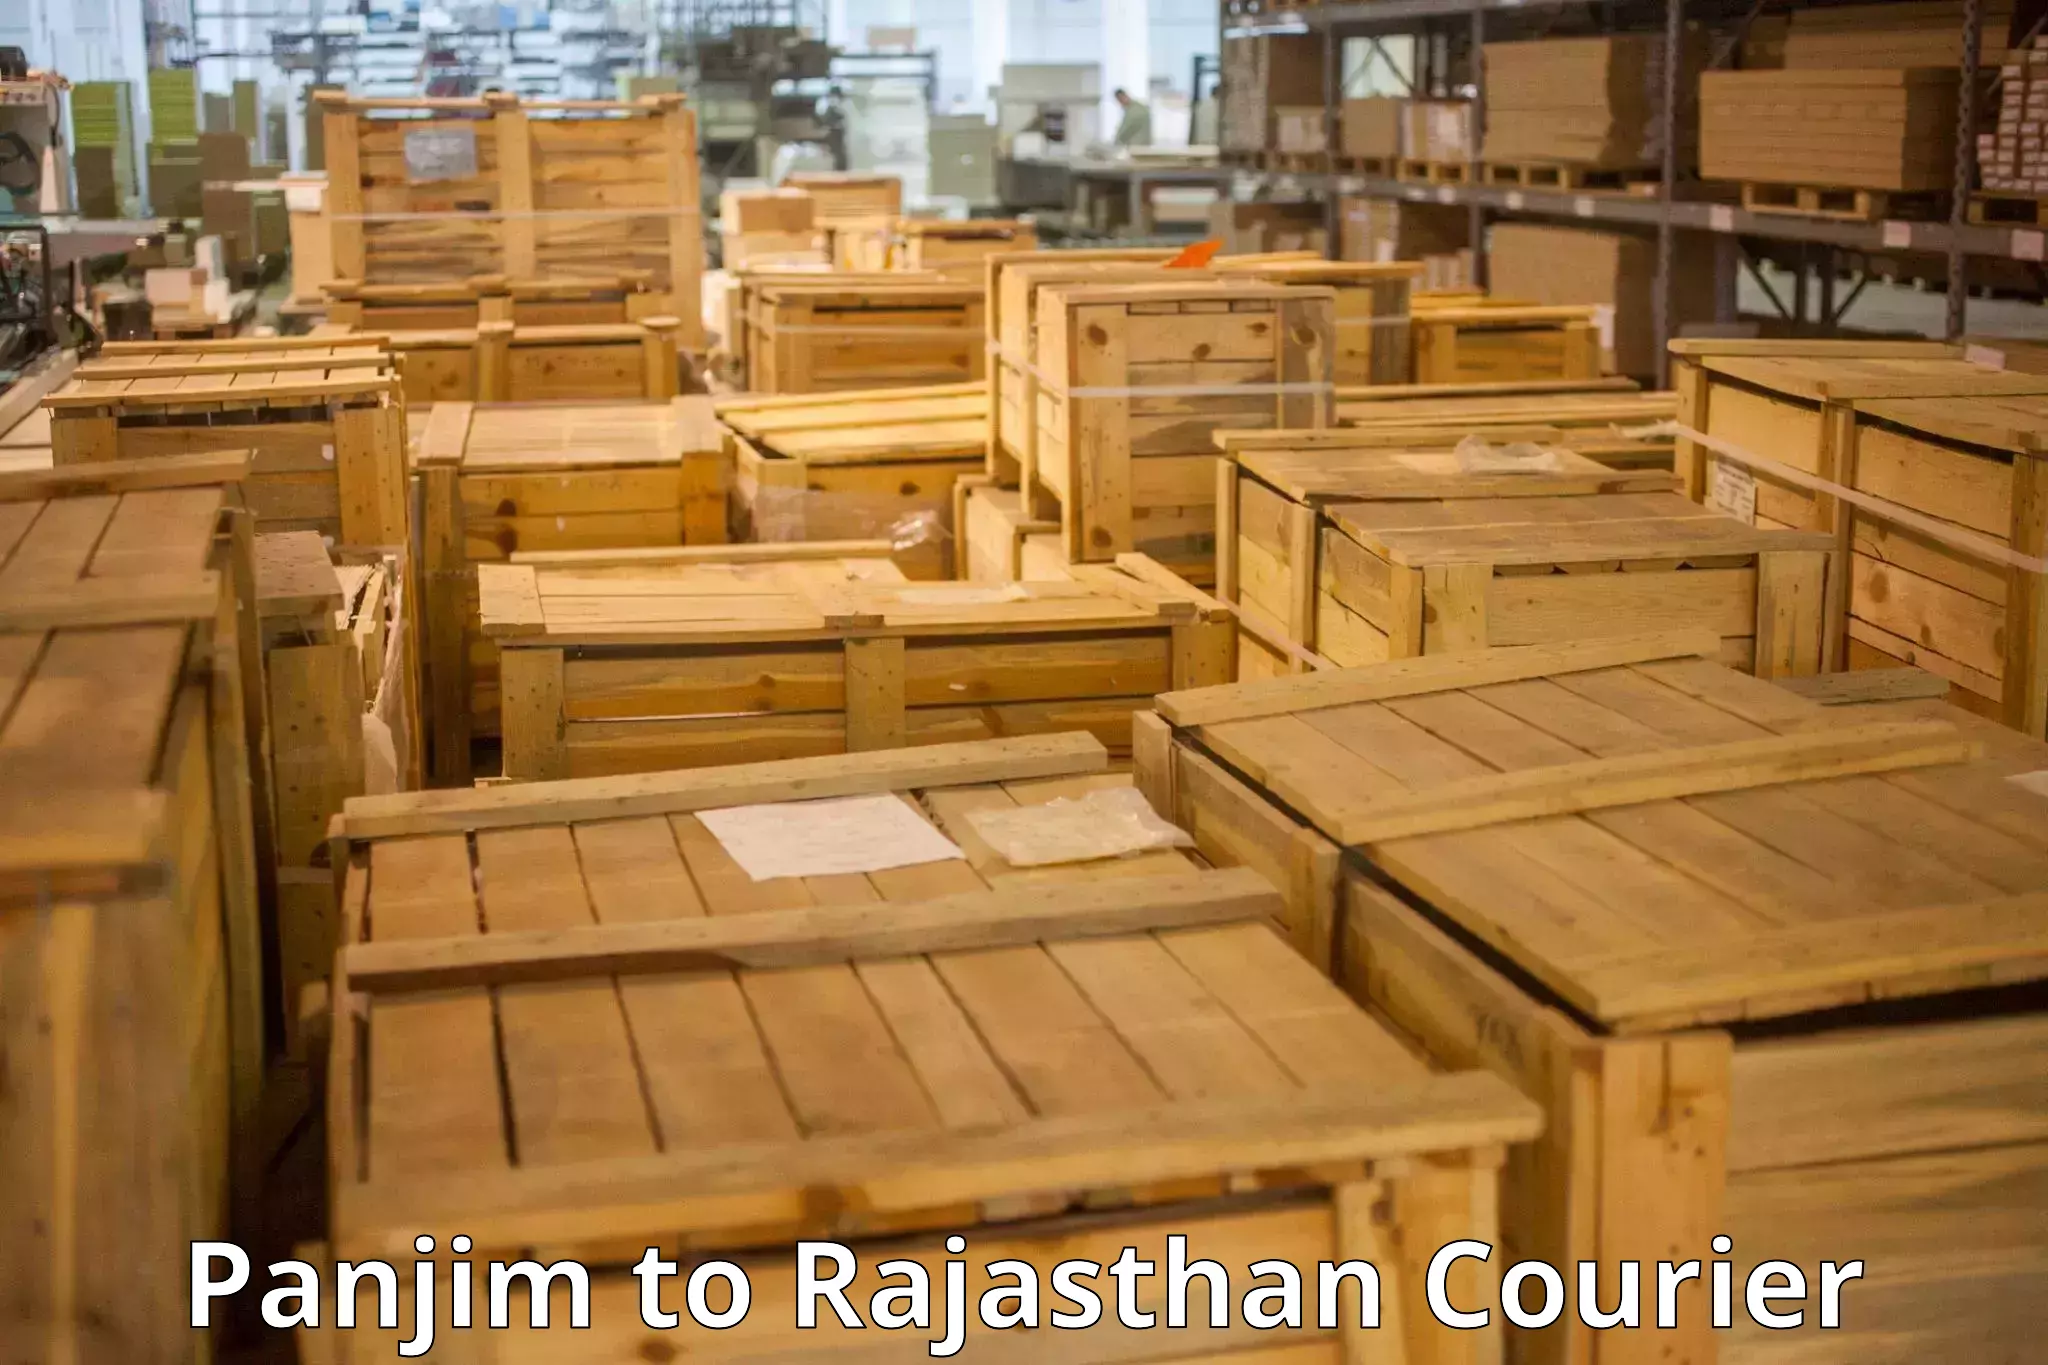 Baggage shipping schedule Panjim to Piparcity